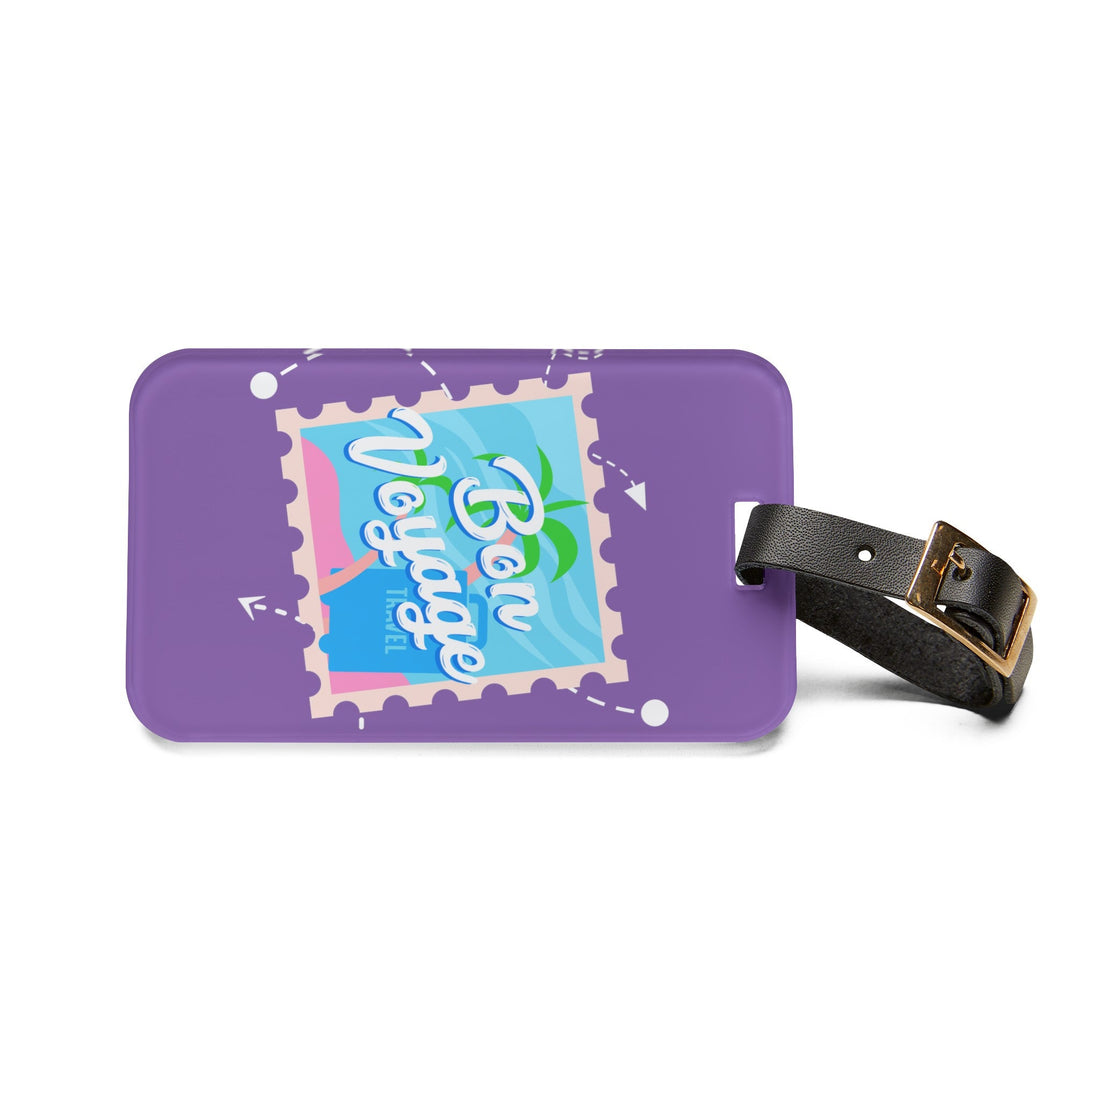 Bon Voyage Luggage Tag - Accessories - Positively Sassy - Bon Voyage Luggage Tag